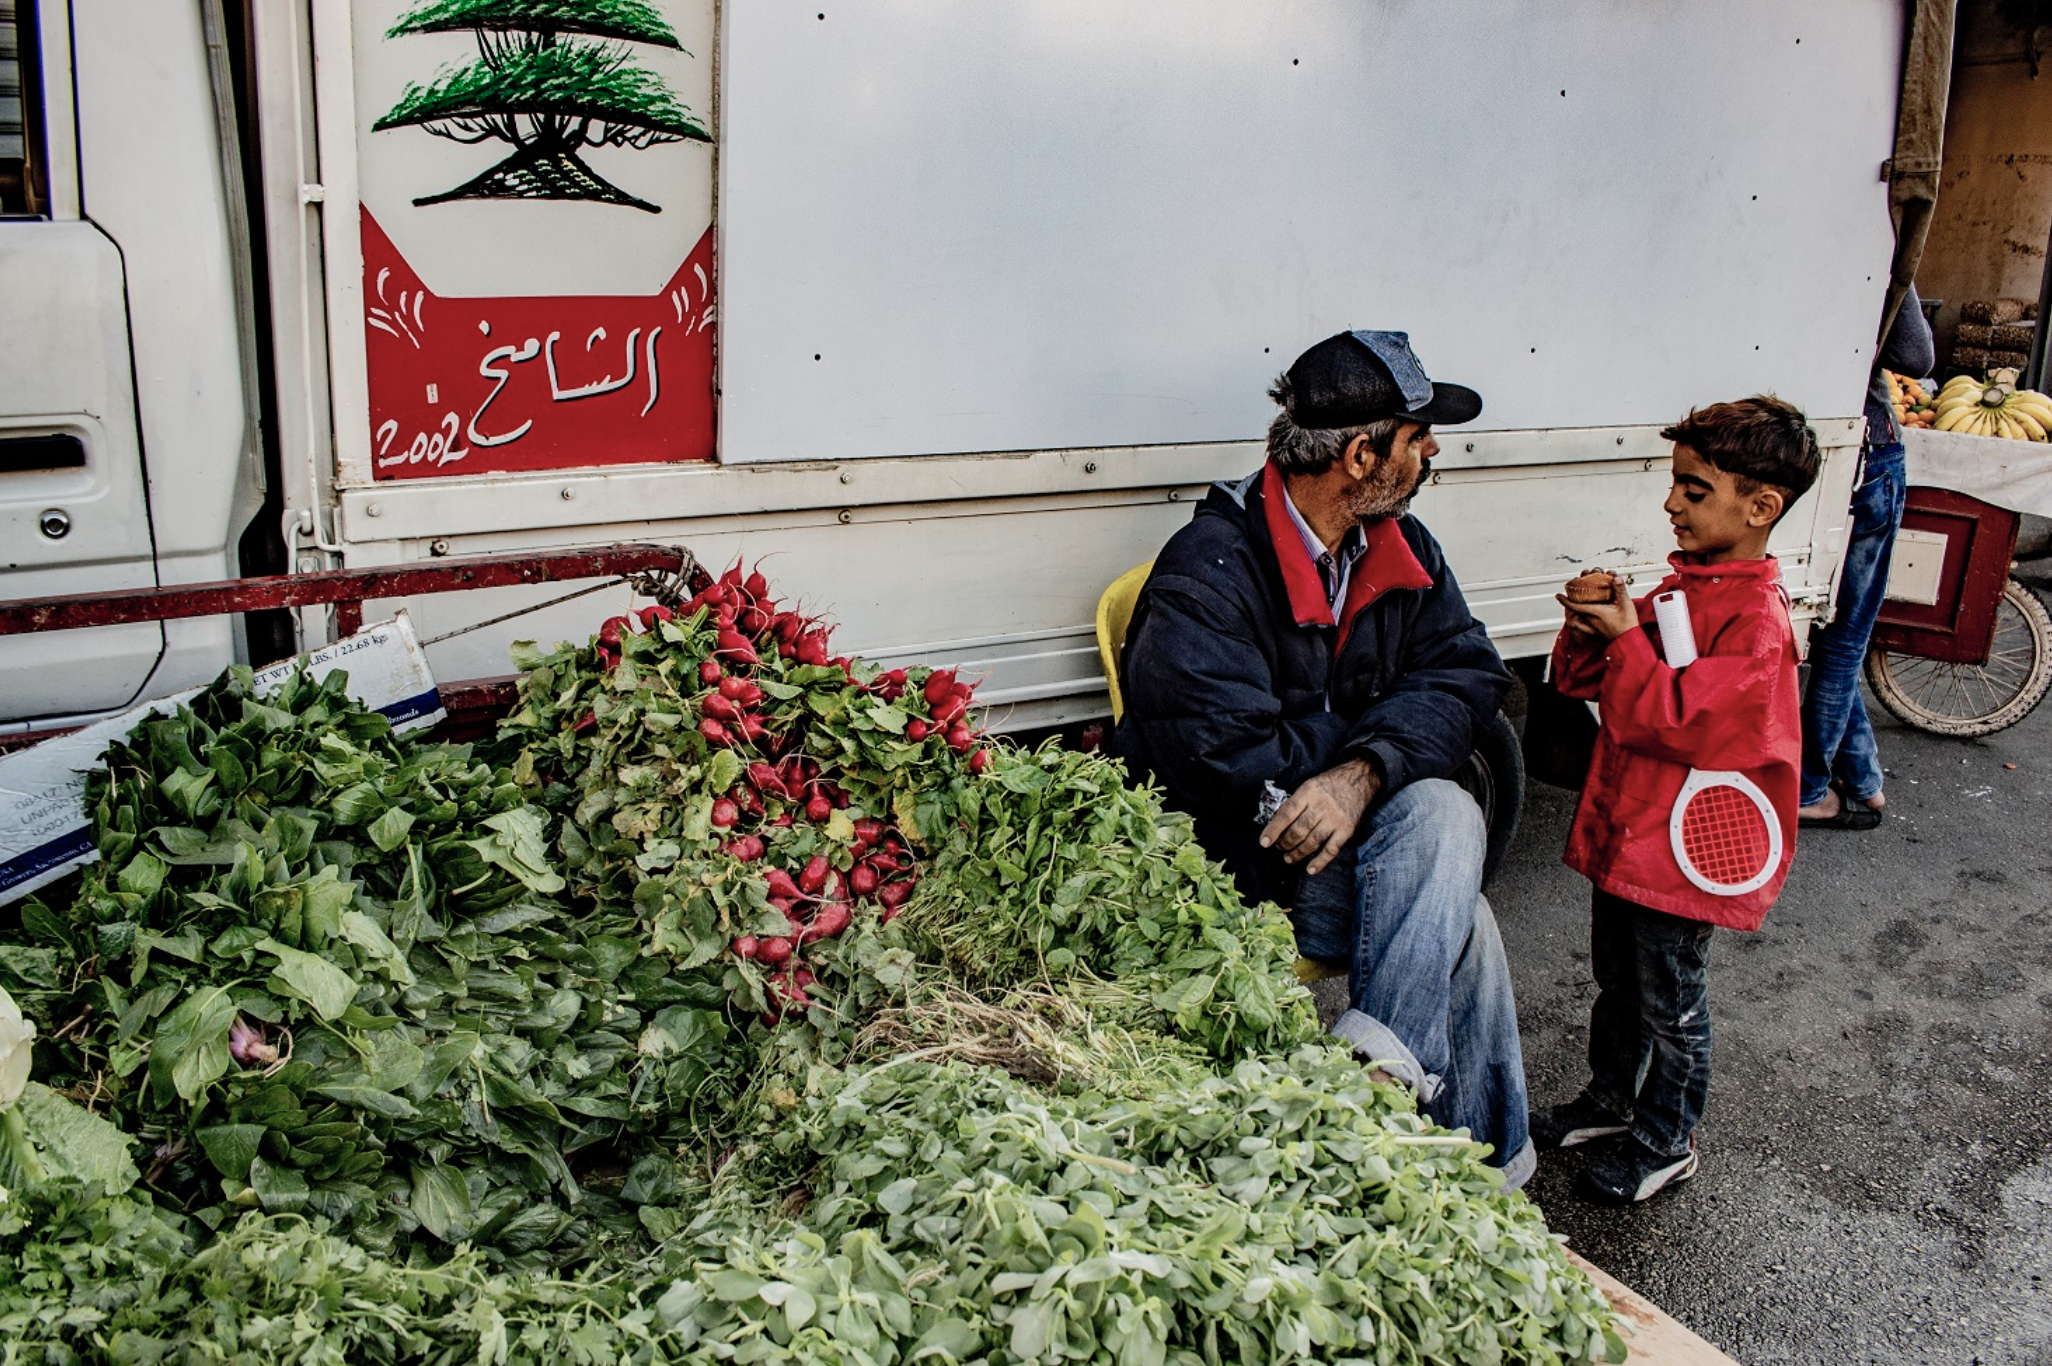 Caption: Young child chatting with his father, a greengrocer selling his fresh products in one of the streets of Beirut.  Photo credit: © RCO/Nadine Daou 